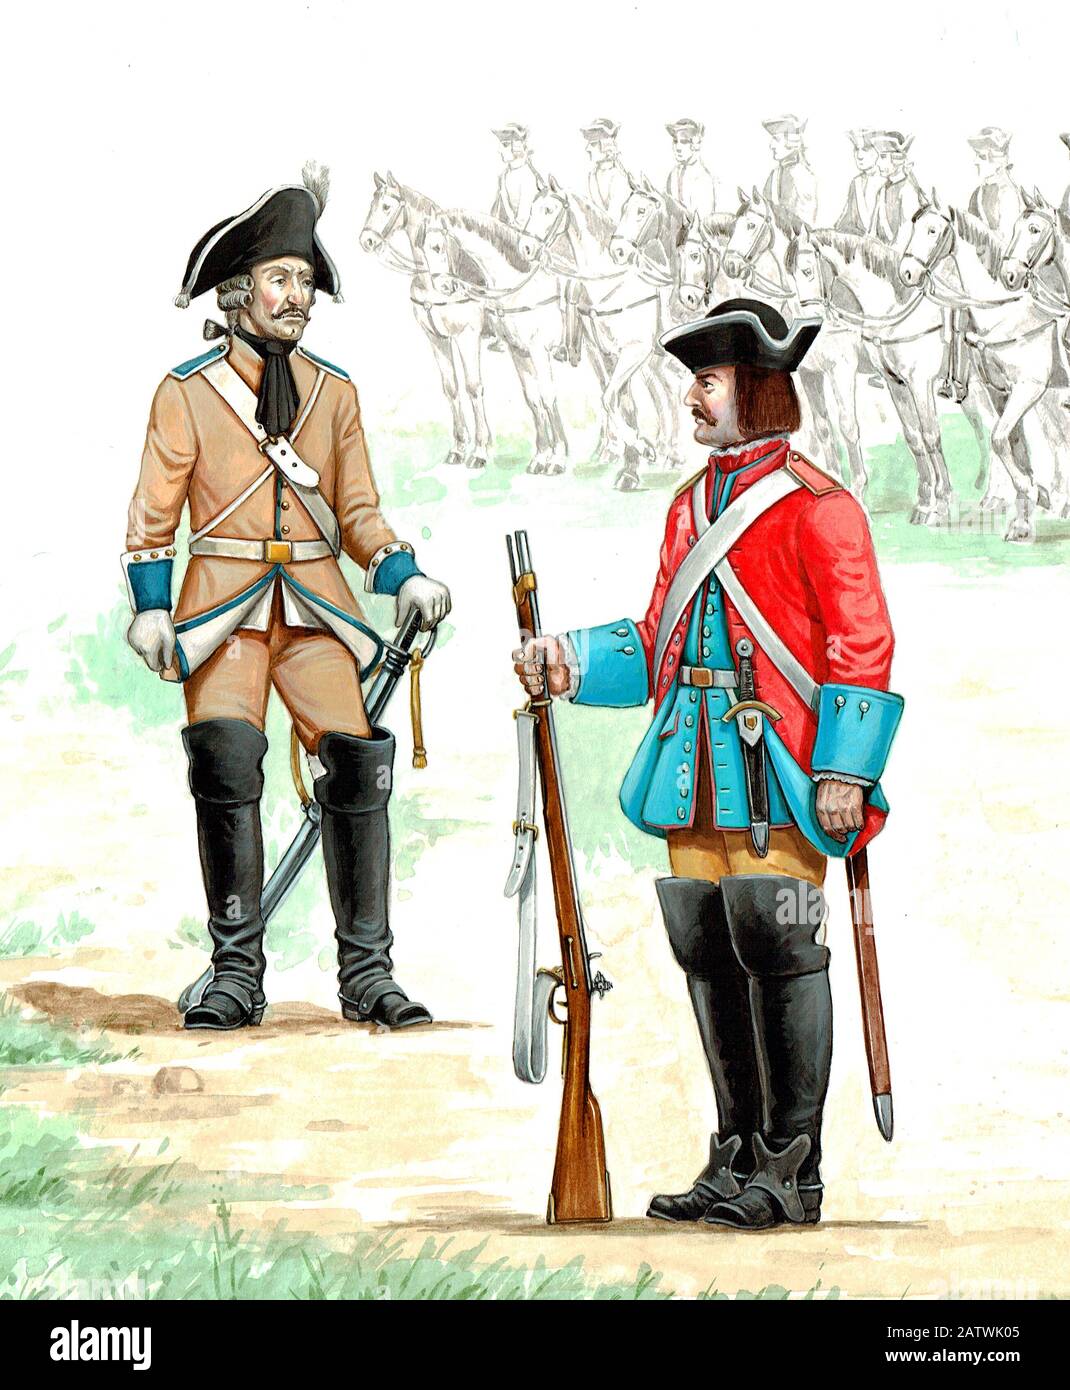 German dragoons regiment illustration. Soldier and officer before the battle. Military uniform illustration. Stock Photo